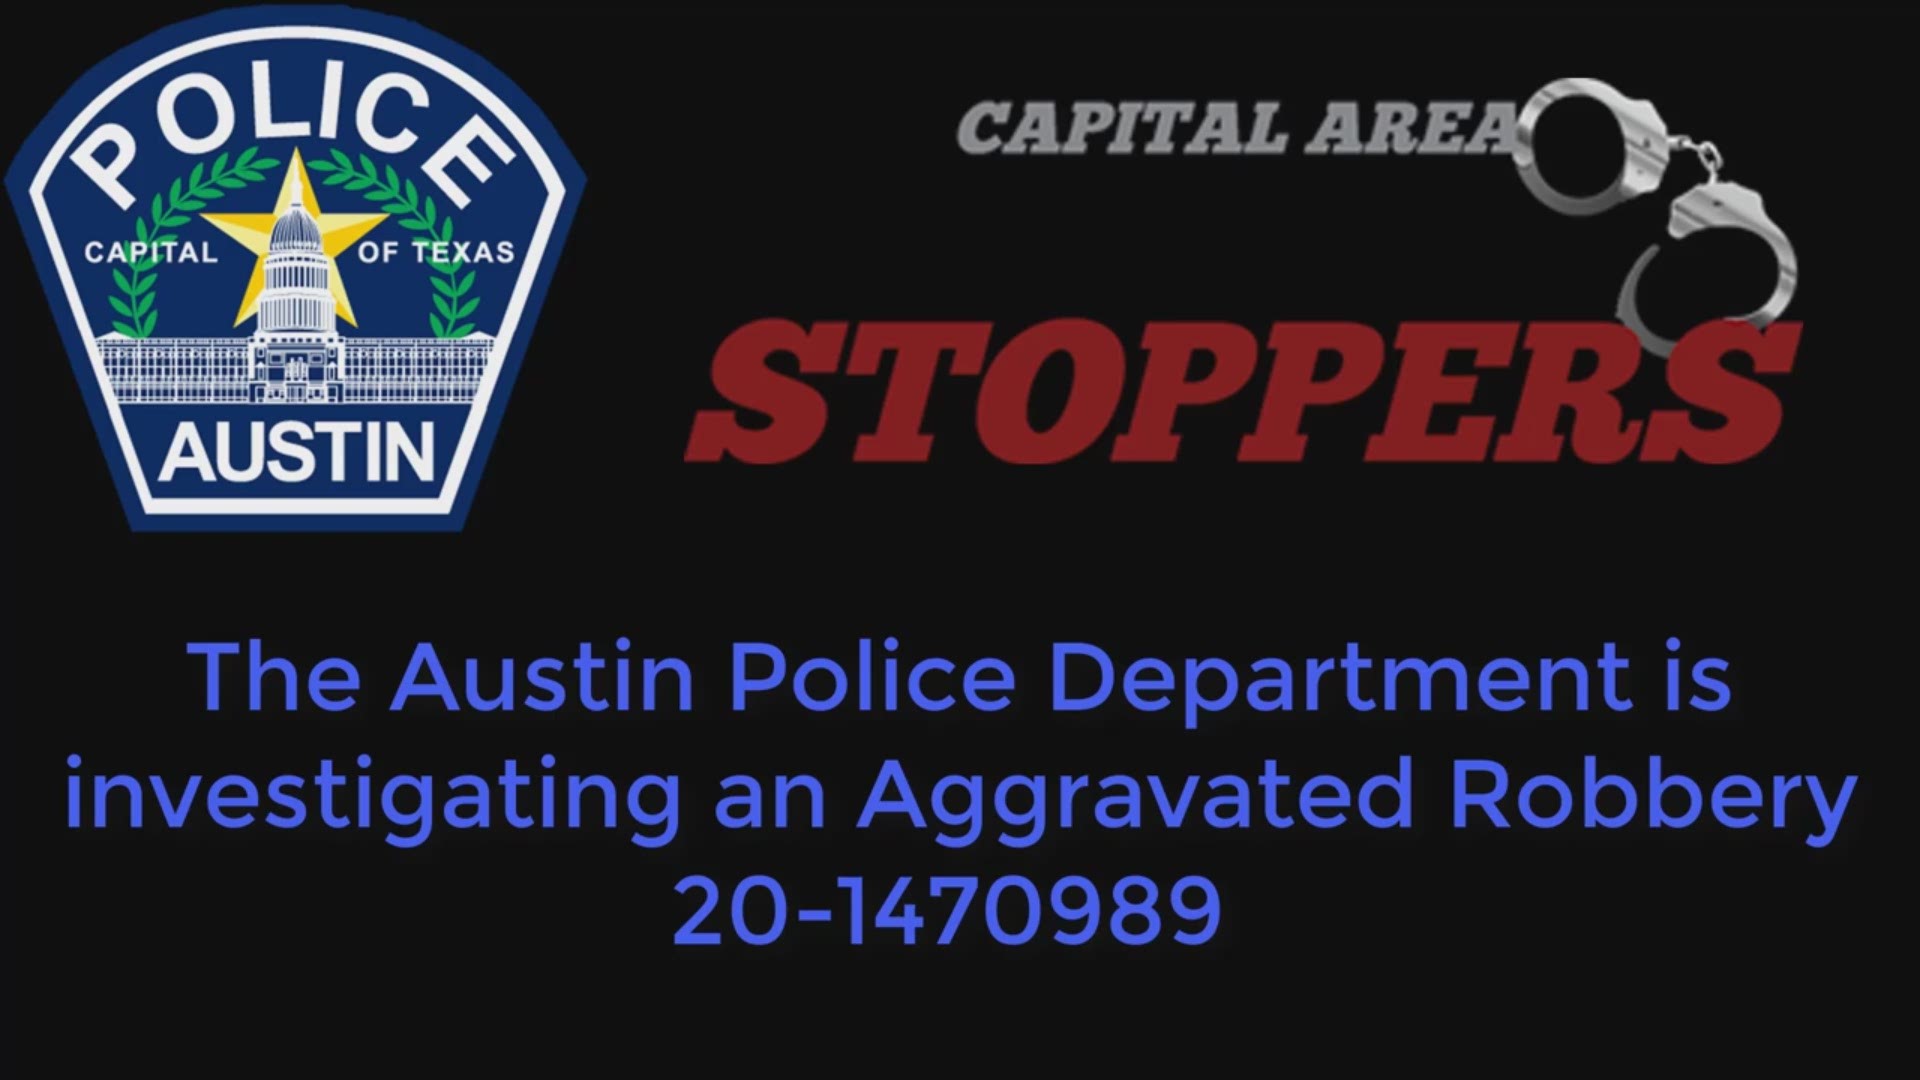 Austin police said four suspects forced entry into the victim’s apartment and robbed the victim and a child at gunpoint.